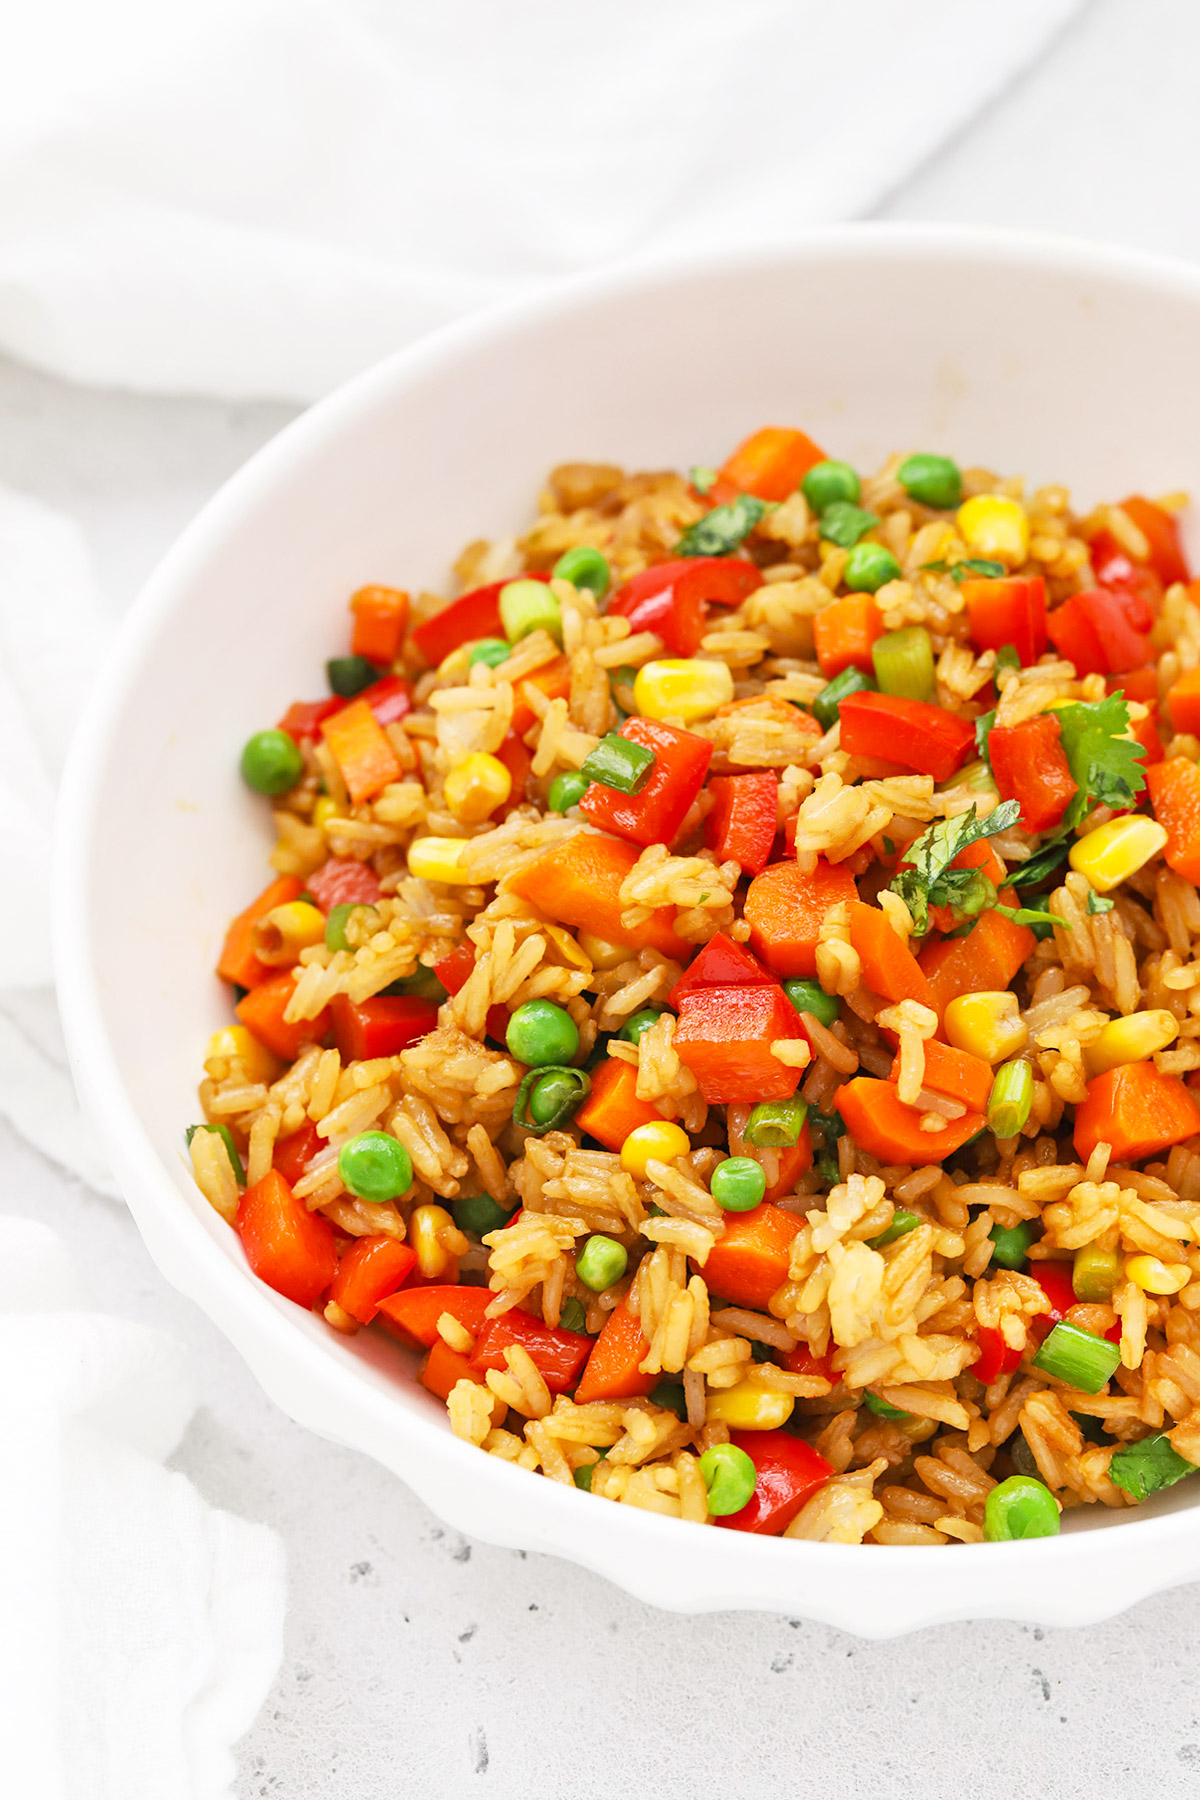 Front view of a serving bowl of healthy vegetarian fried rice with colorful veggies